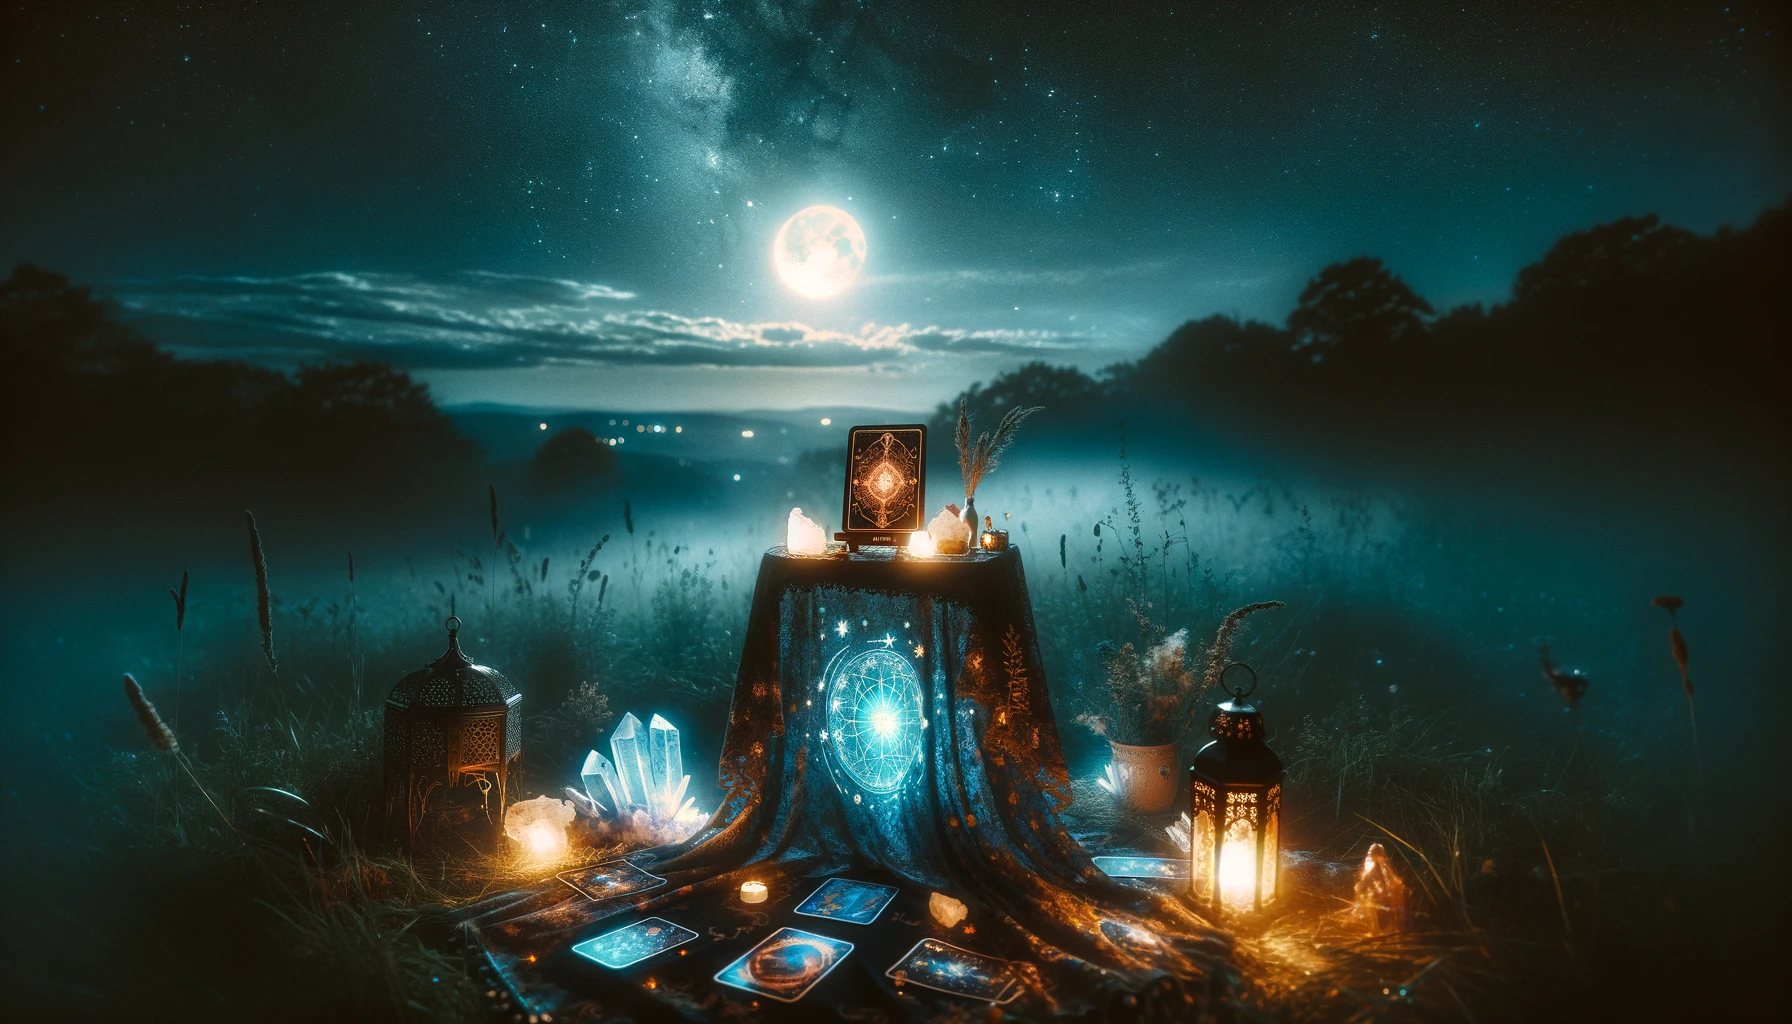 A mystical and atmospheric tarot reading setup at night, outdoors under a starry sky